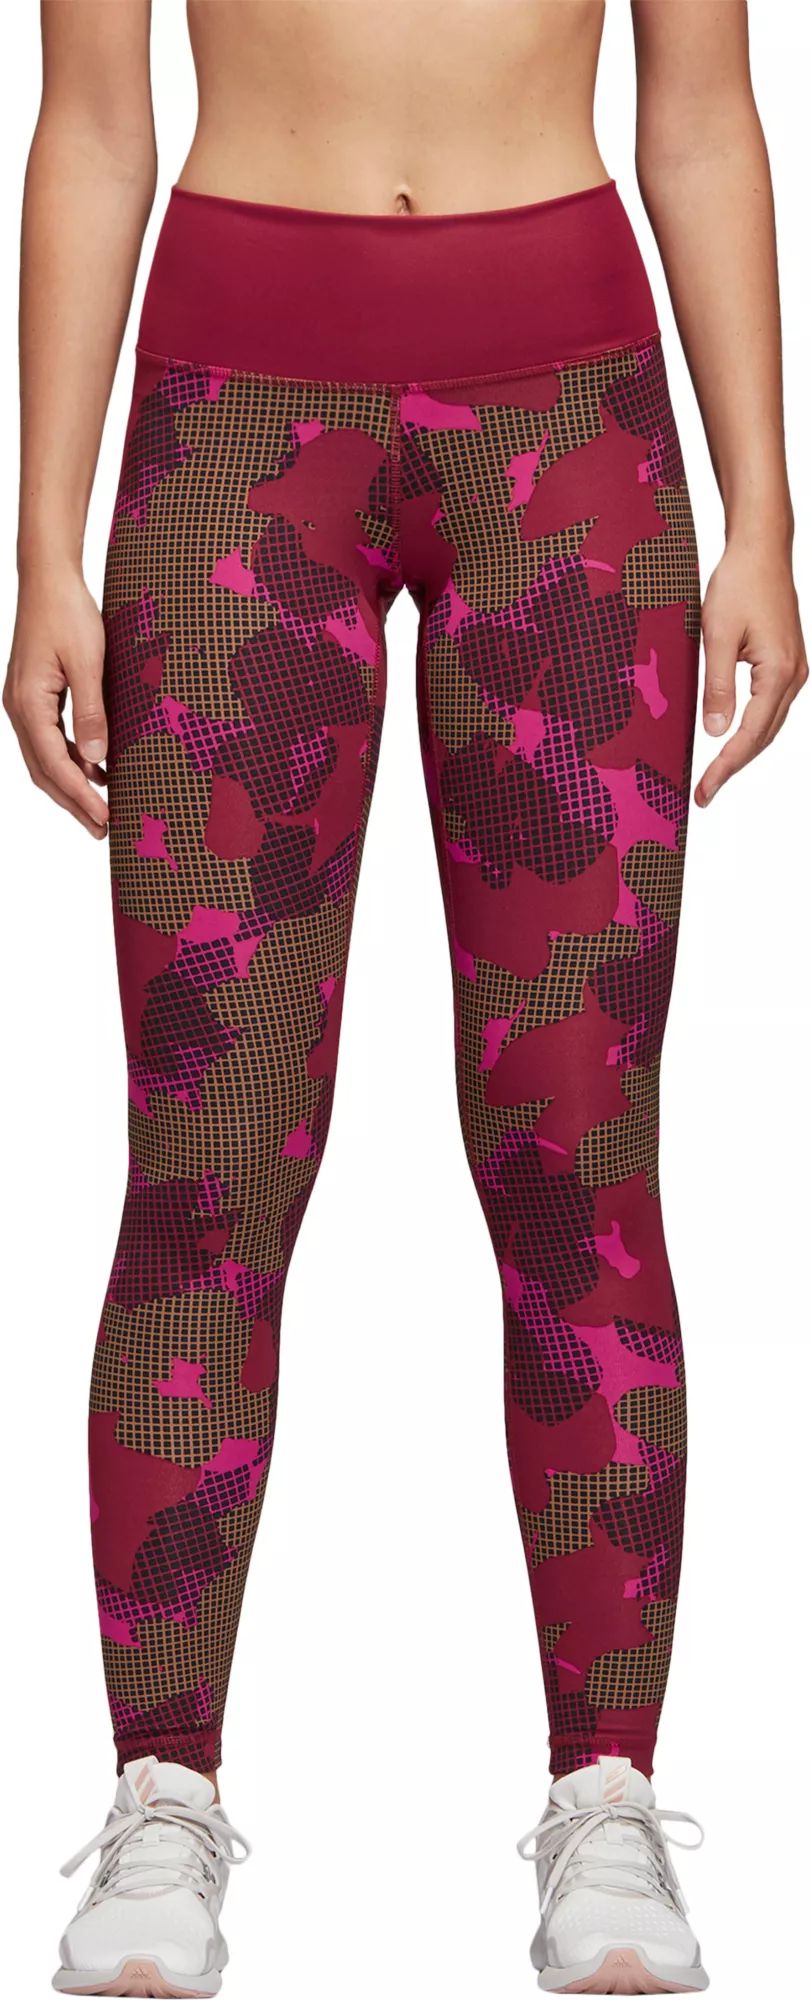 adidas Women's Believe This High Rise Tights, Size: XS, Noble Maroon Print | Dick's Sporting Goods